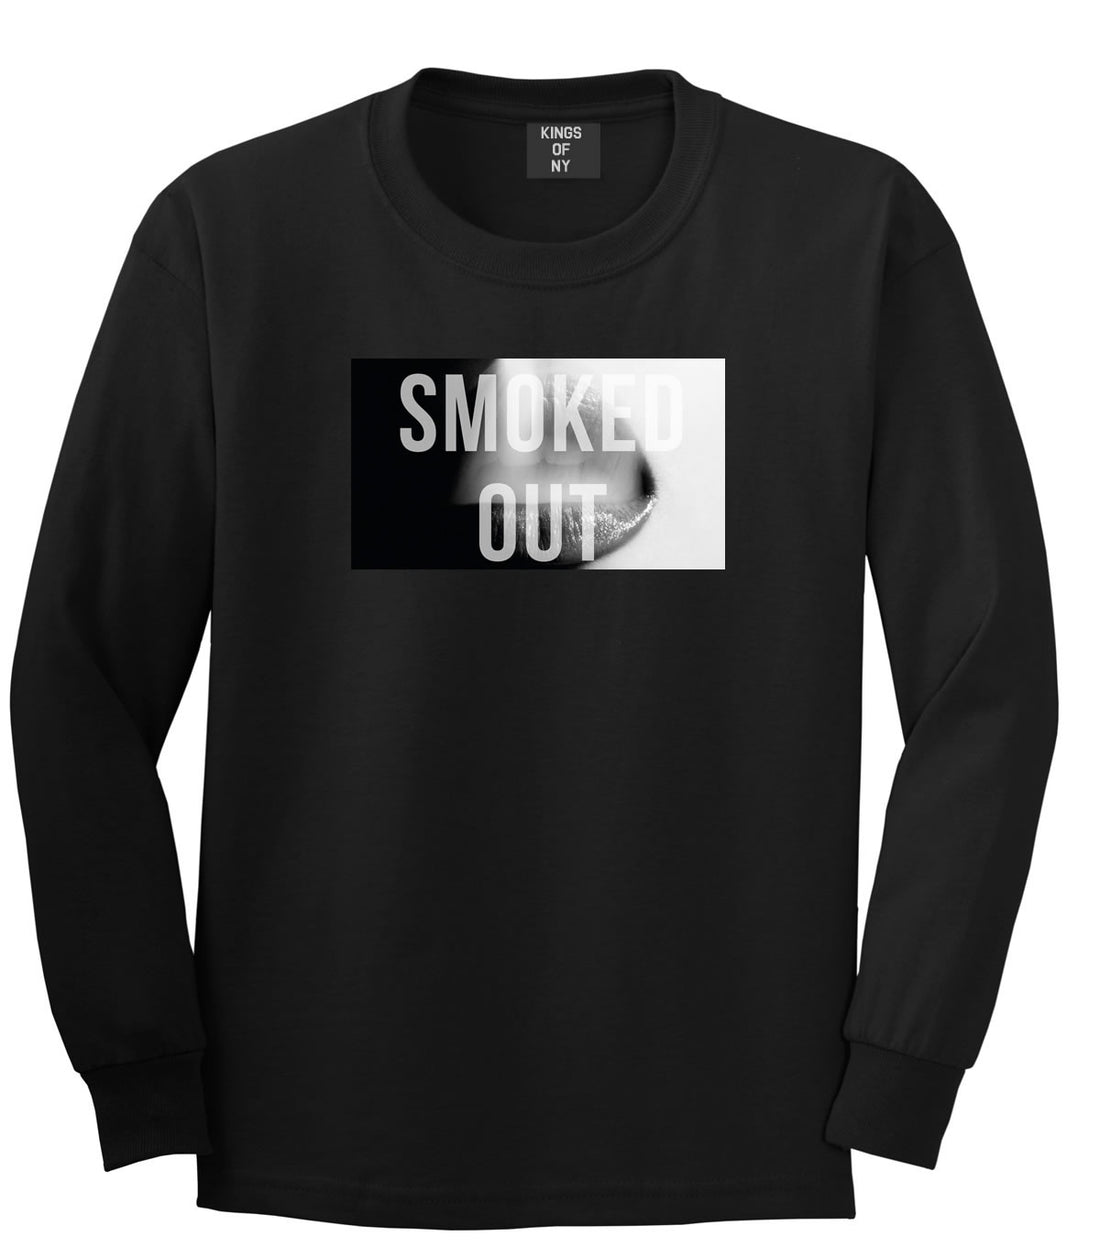 Smoked Out Weed Marijuana Girls Pot New York Long Sleeve Boys Kids T-Shirt In Black by Kings Of NY